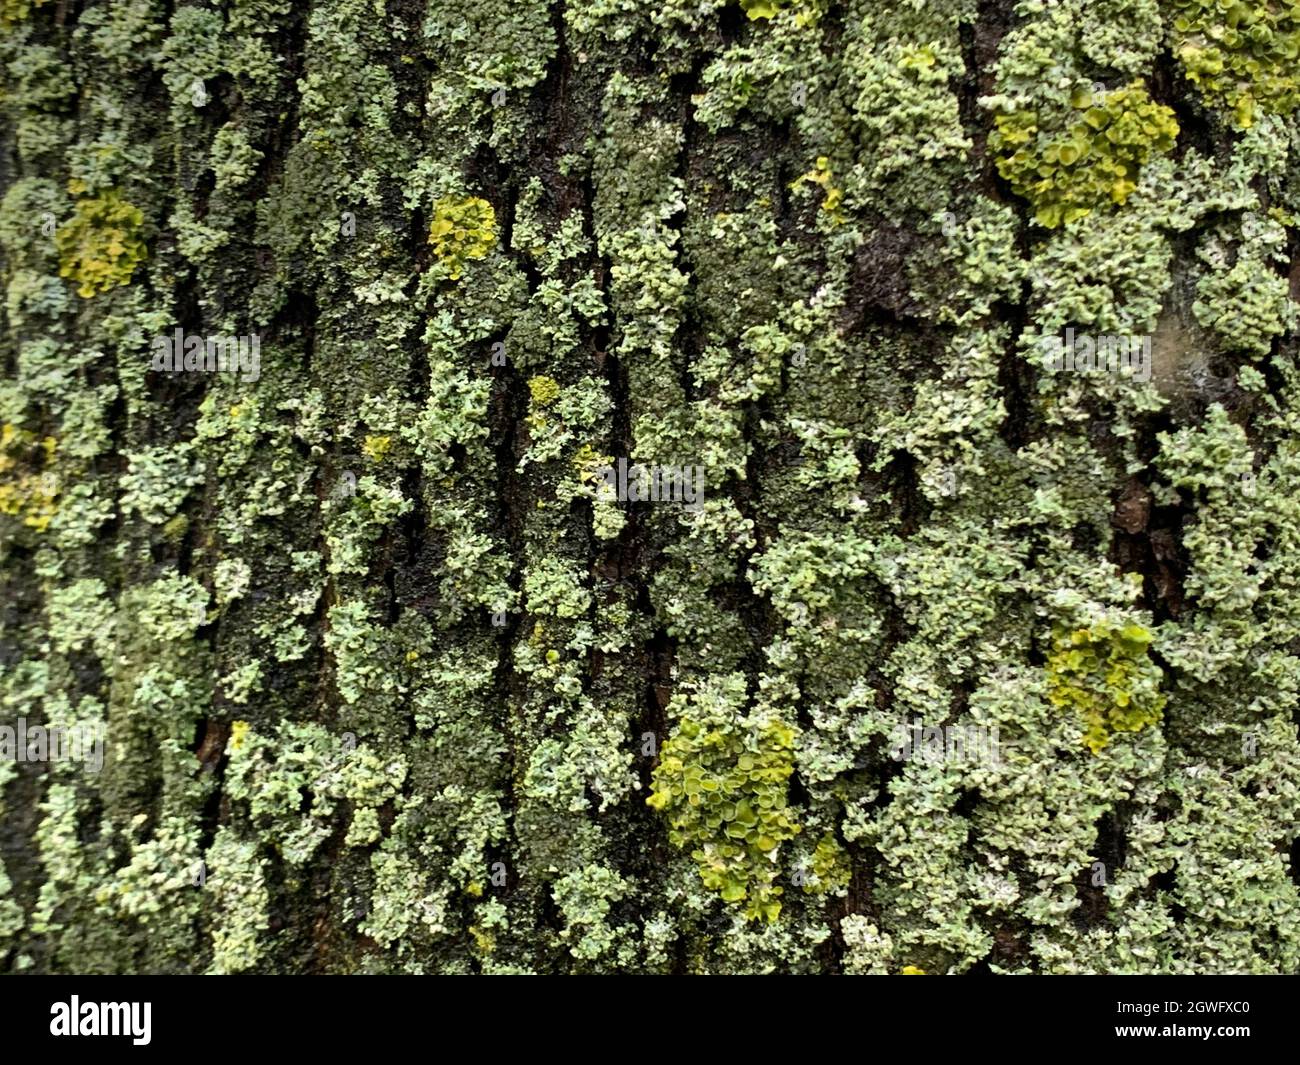 Full Frame Shot Of Moss Growing On Tree Trunk Stock Photo